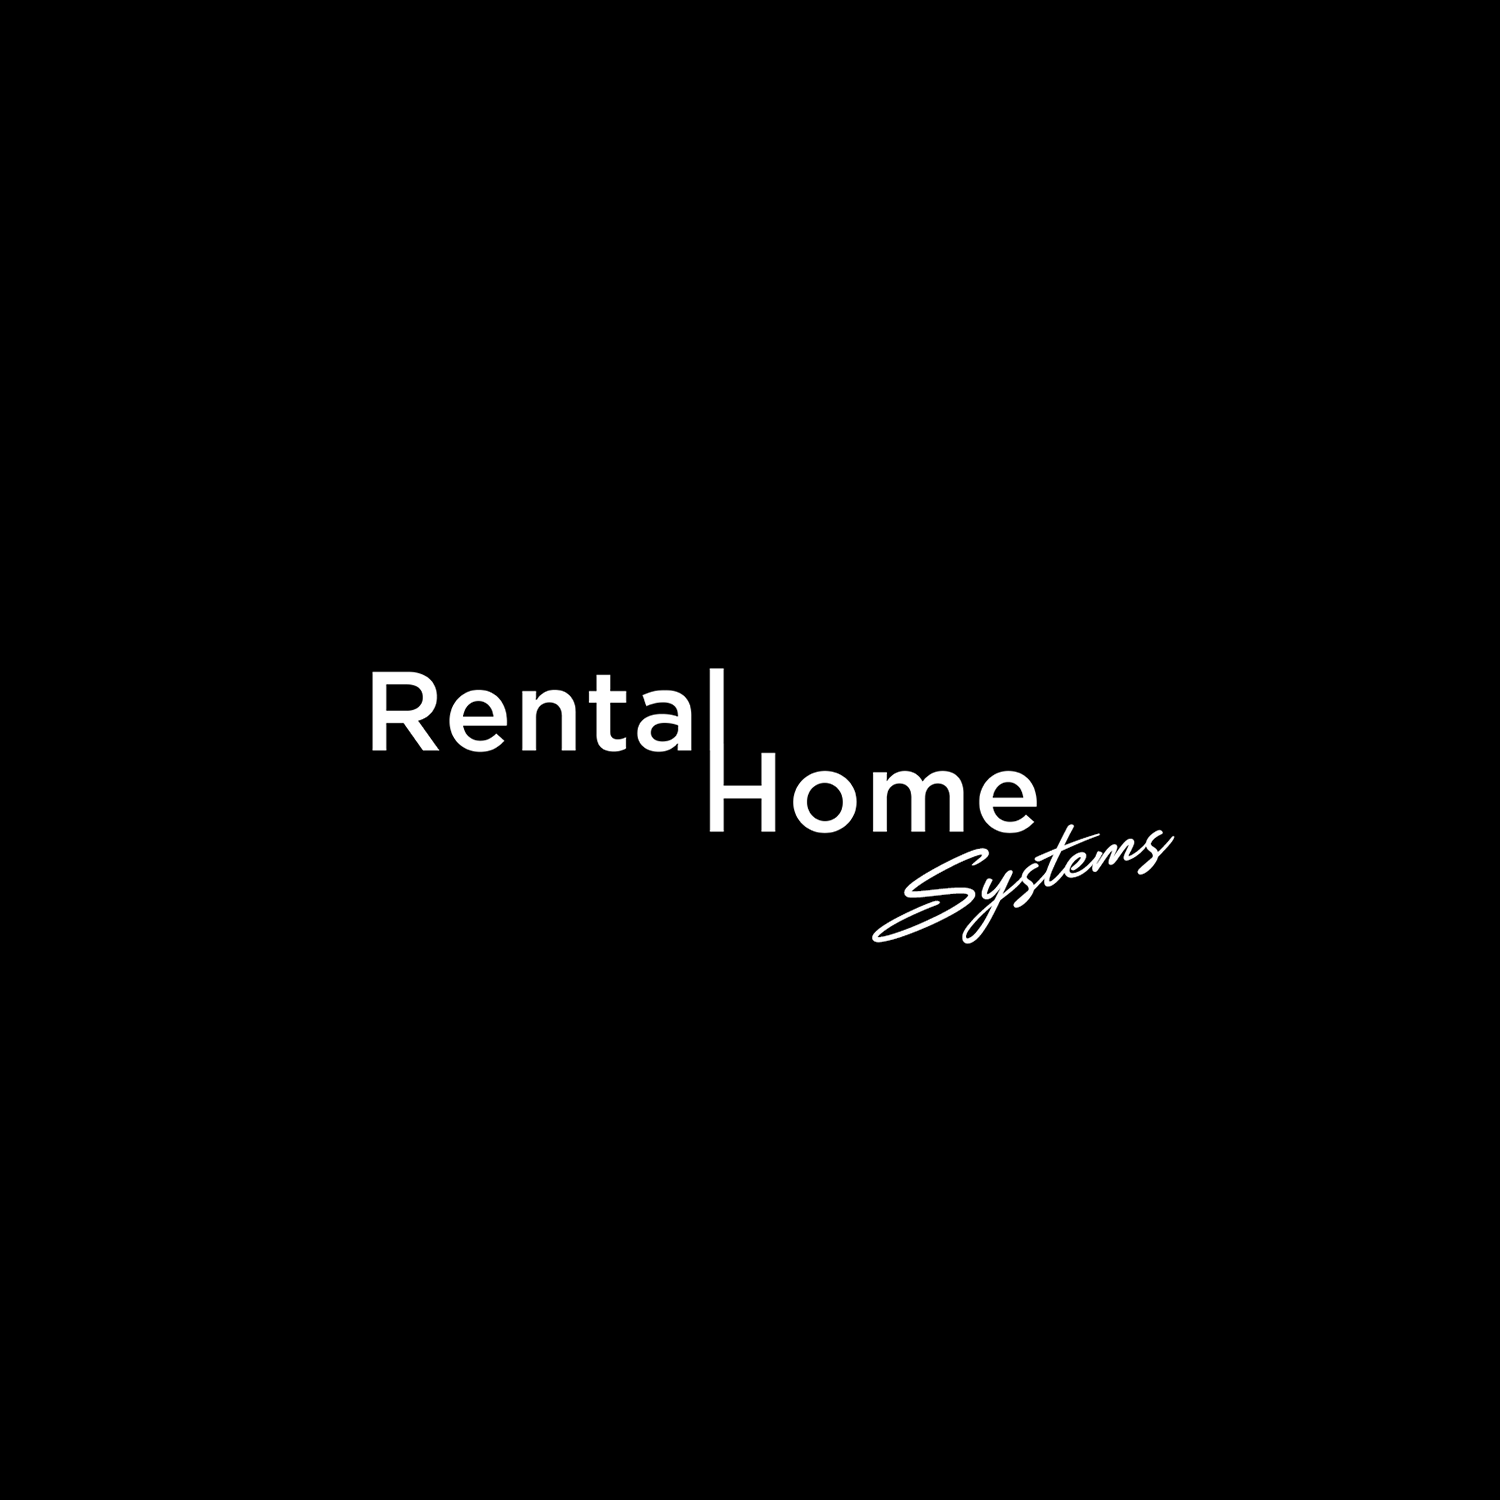 Rental Home Systems